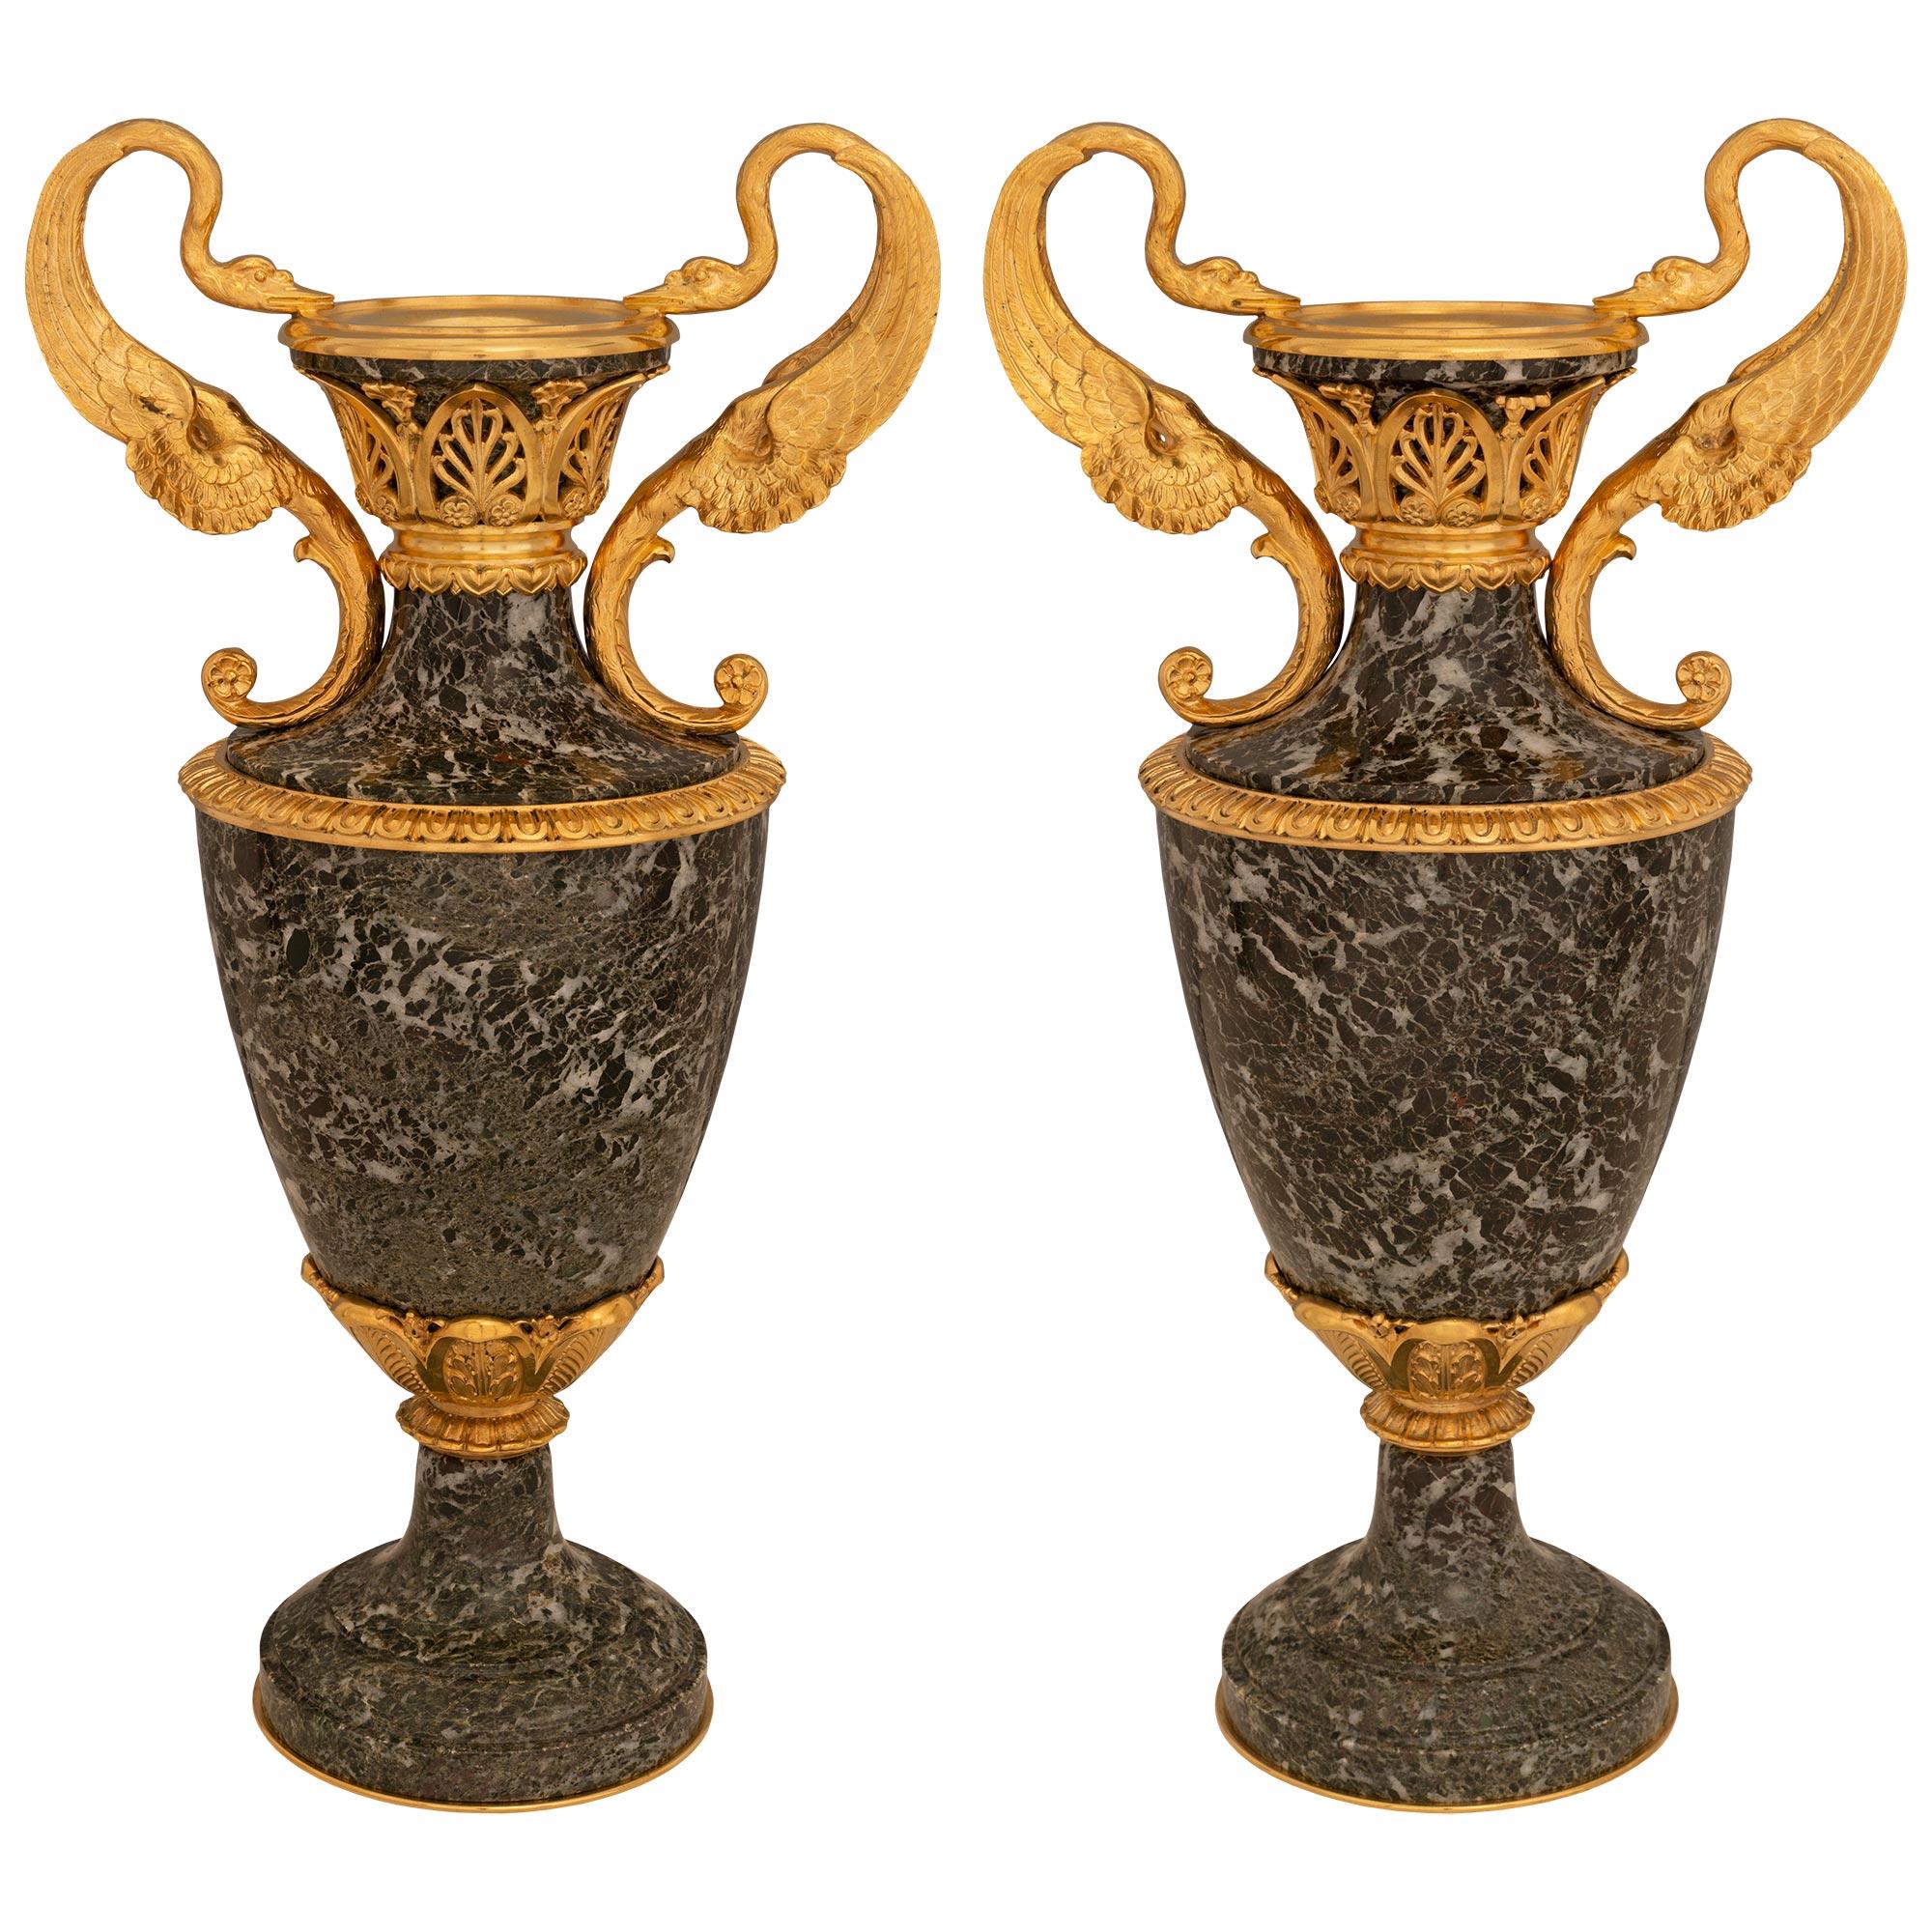 Pair Of French 19th Century Belle Époque Period Green Marble & Ormolu Urns For Sale 7